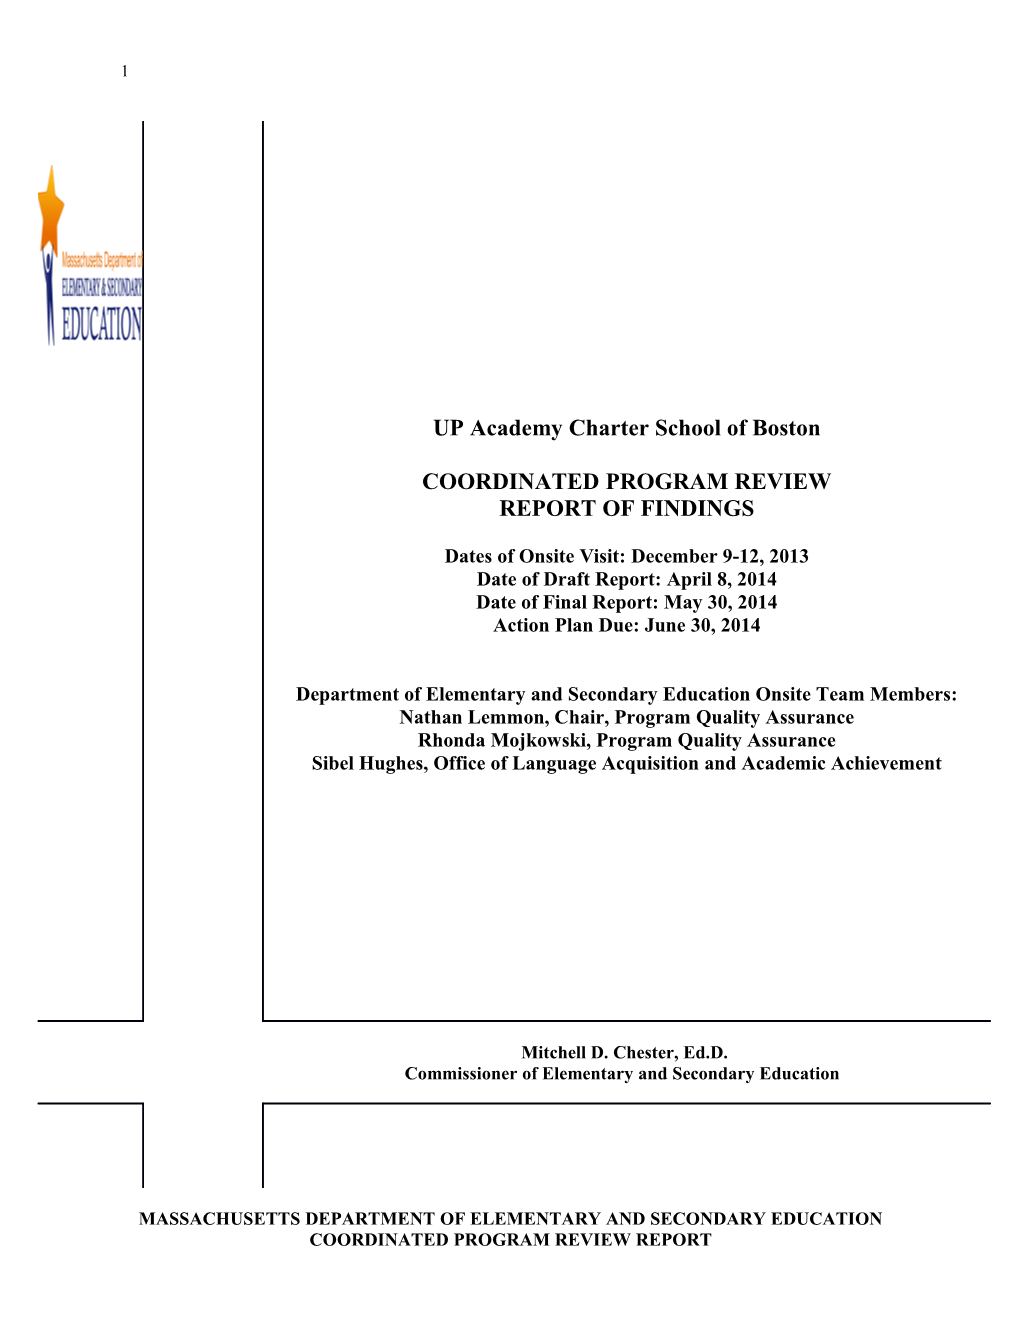 UP Academy Charter School of Boston CPR Final Report 2014